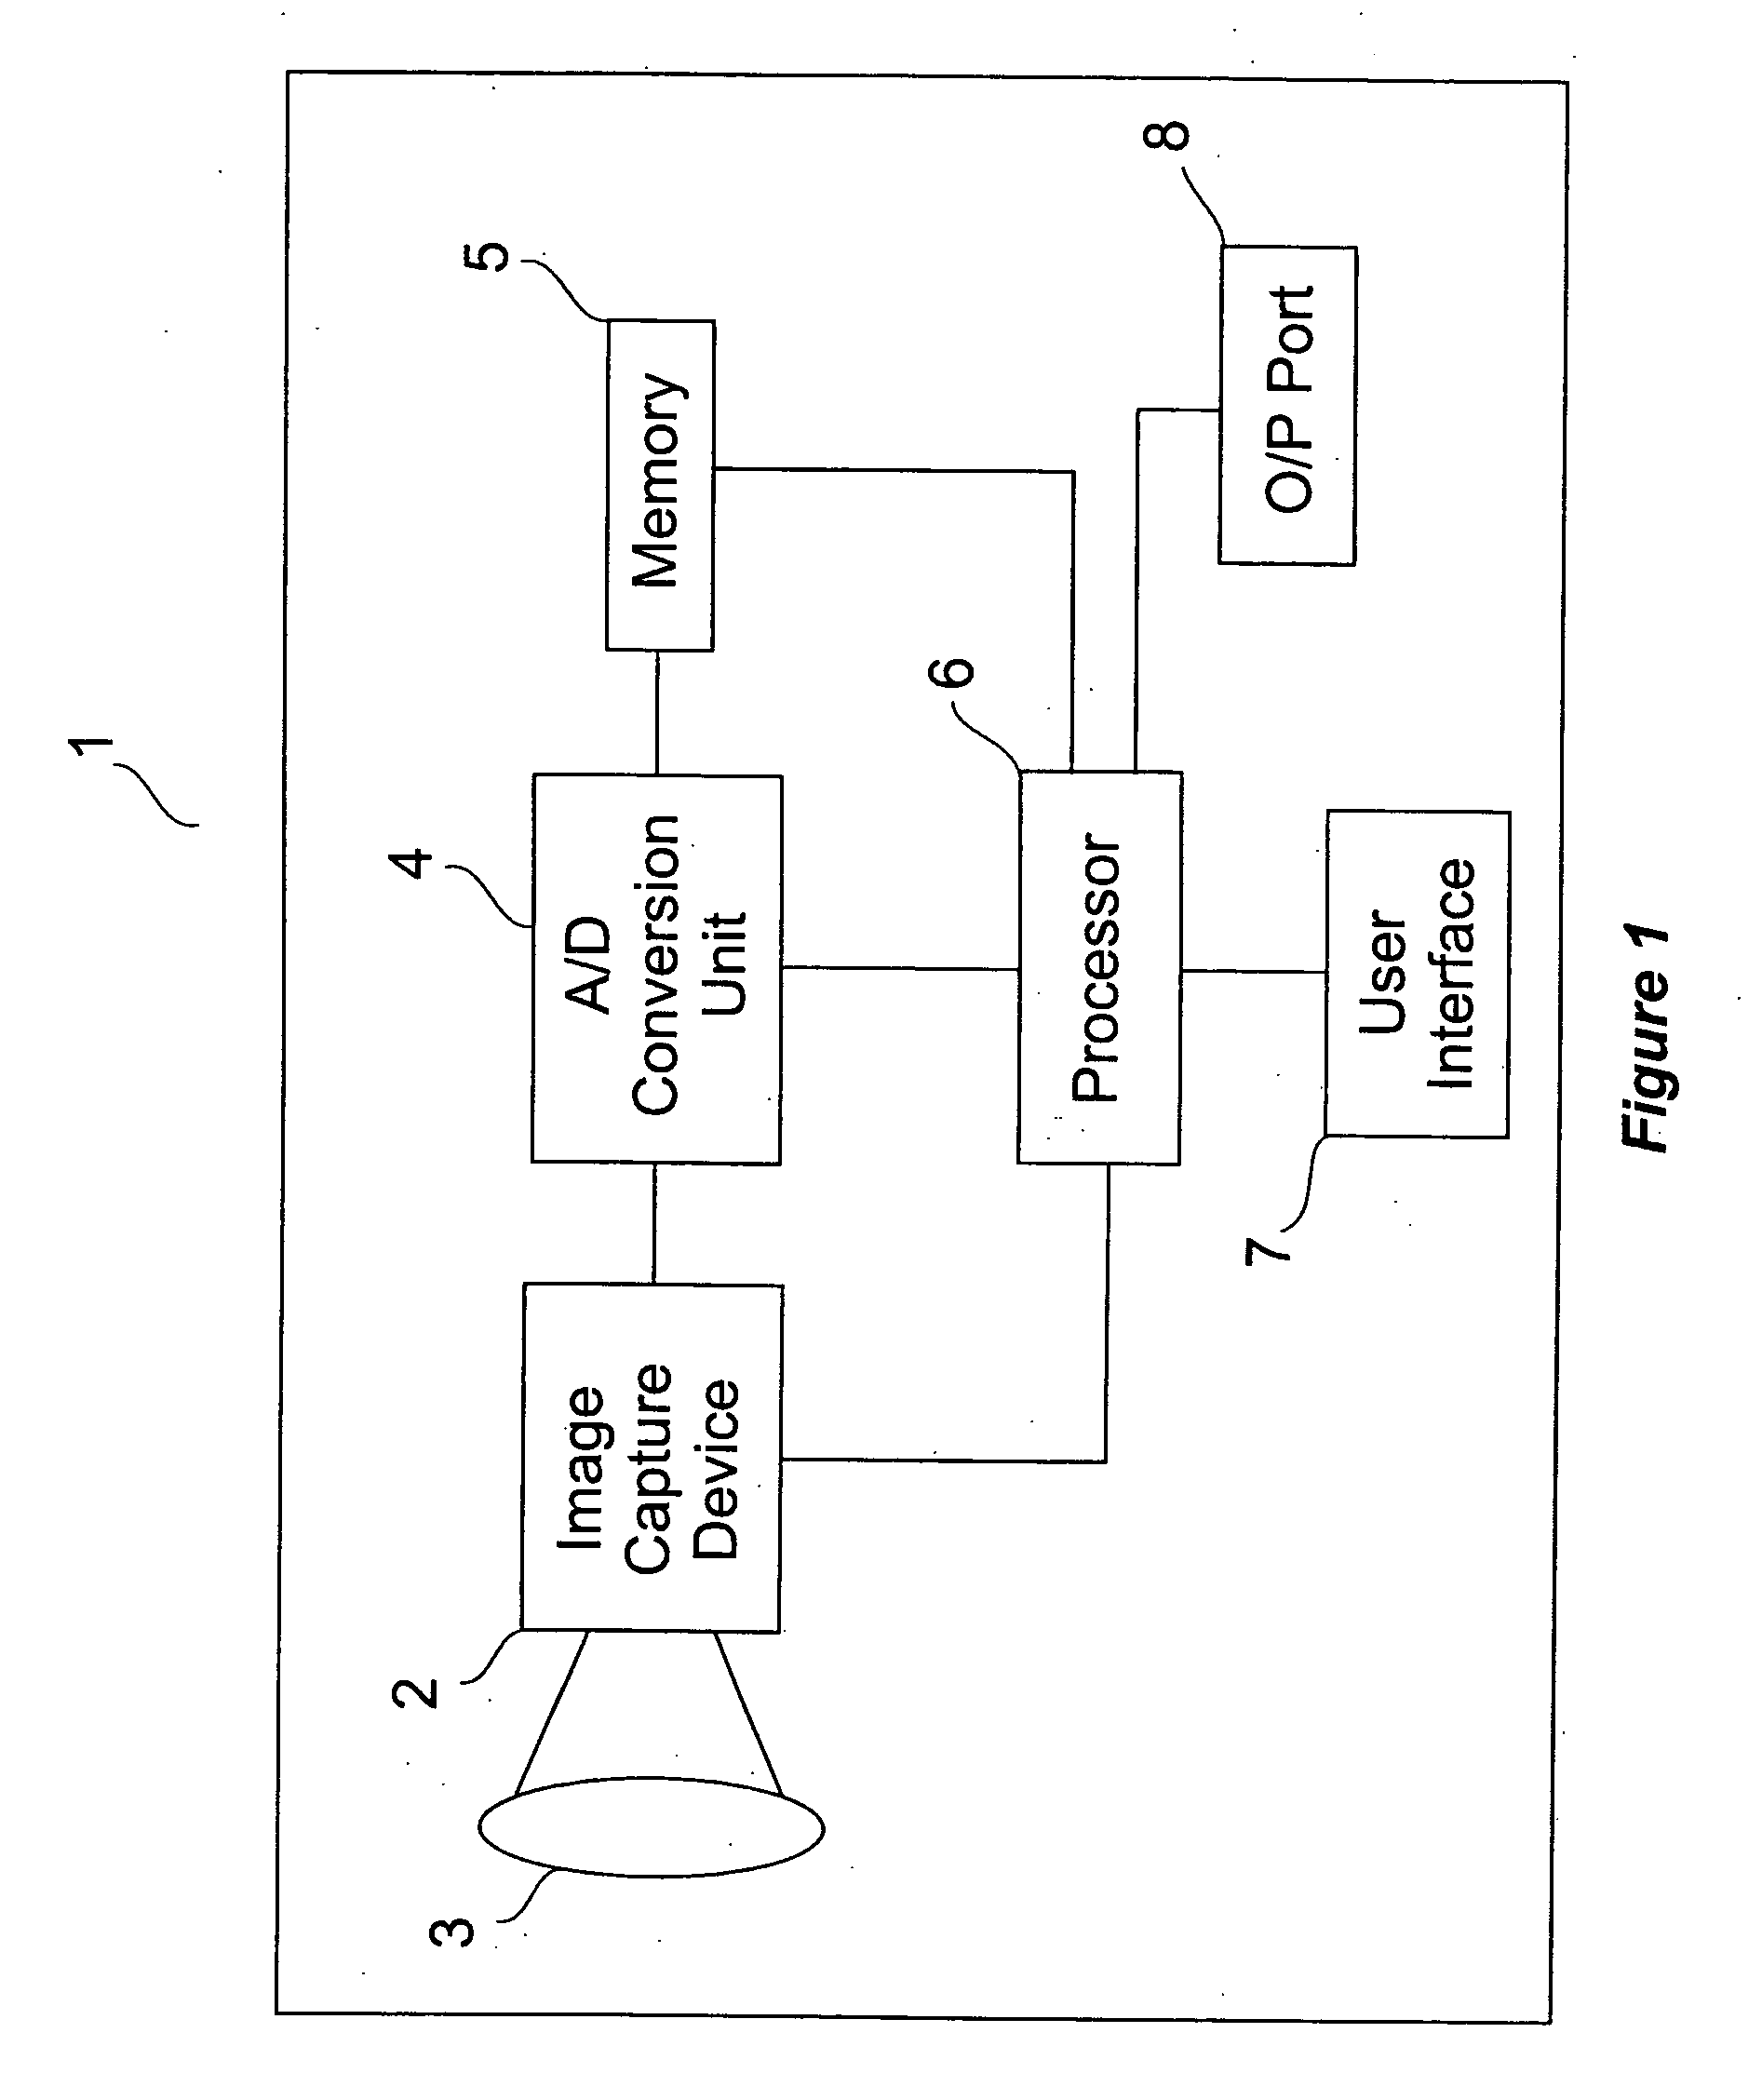 Automatic perspective distortion detection and correction for document imaging